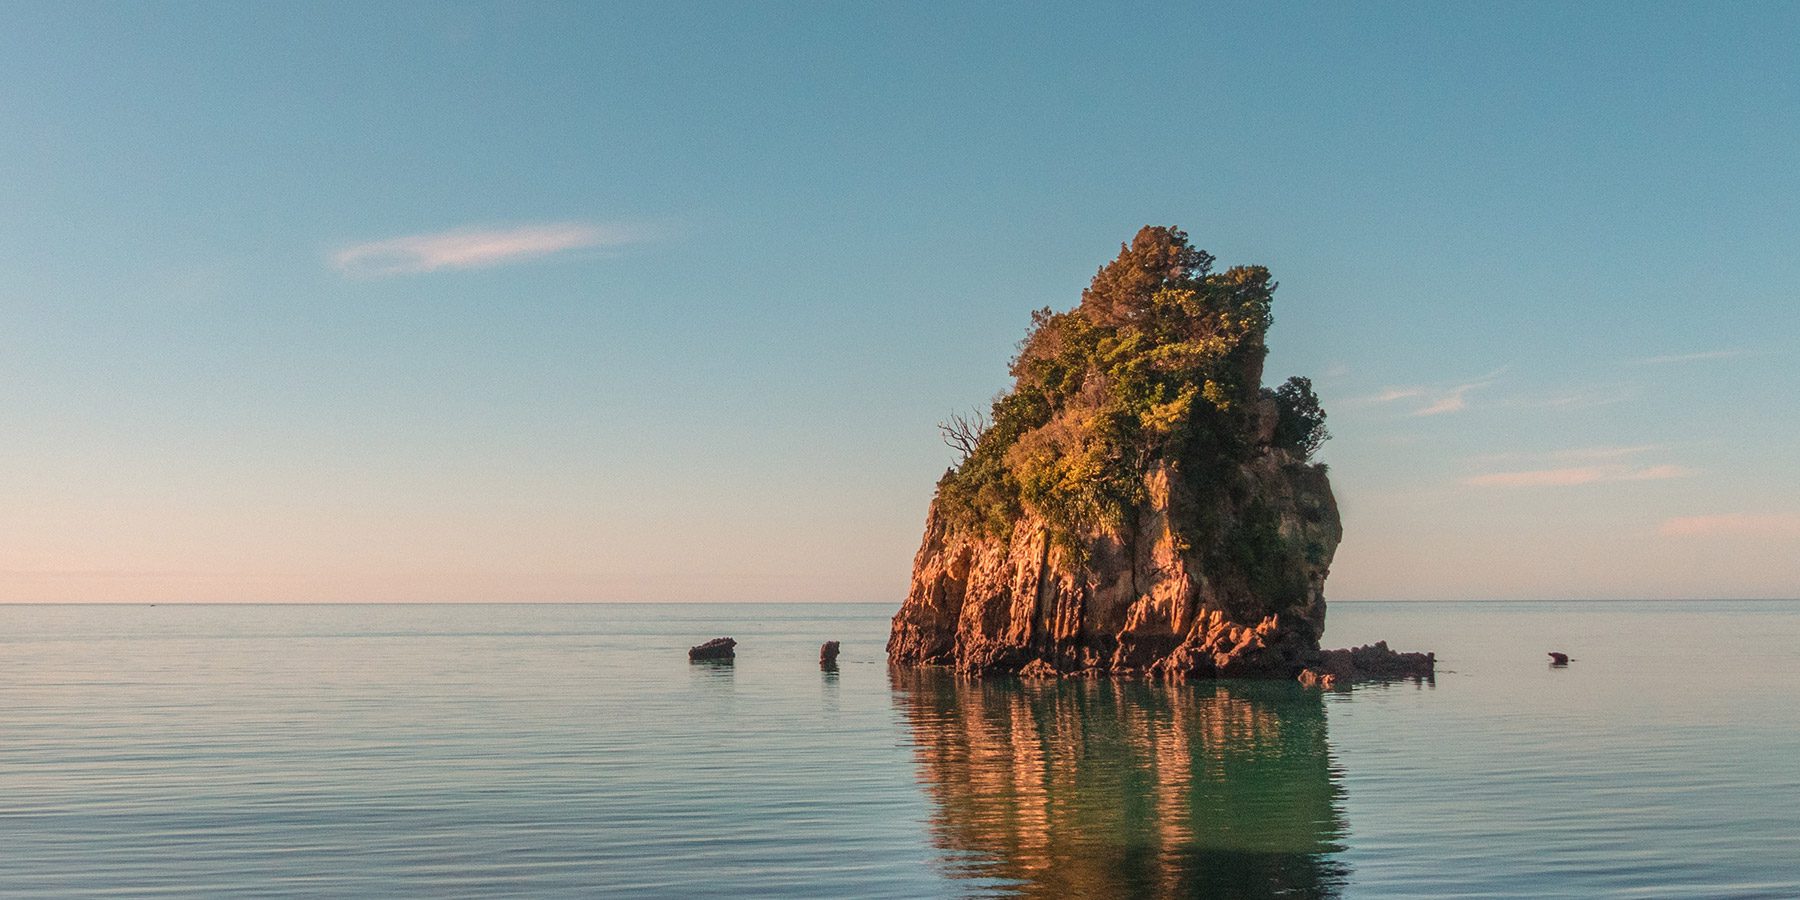 Tiny, lone island emerging from the water. Abel Tasman, New Zealand